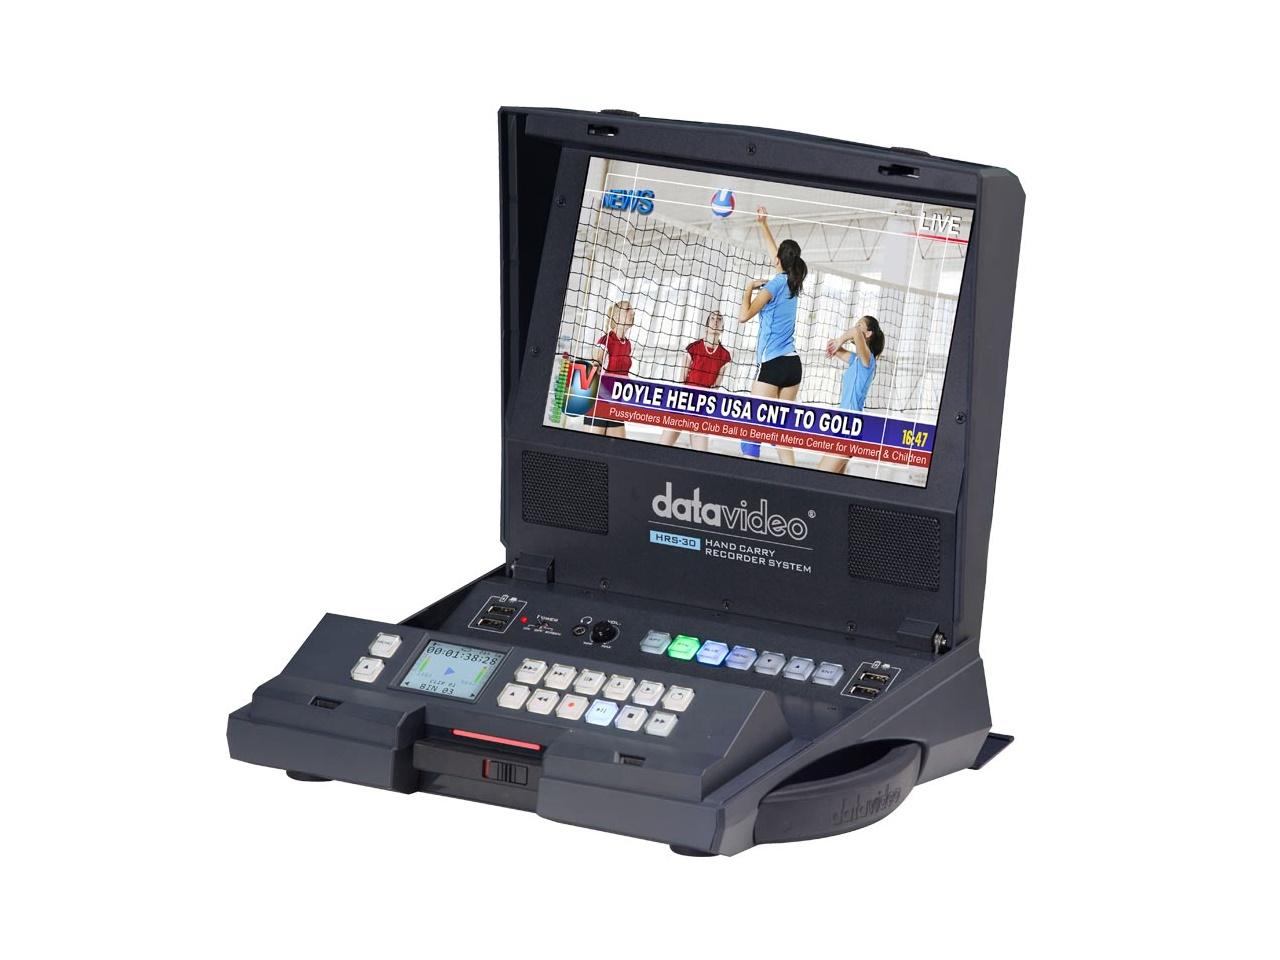 HRS-30 HD/SD Hand Carry Recorder System by Datavideo